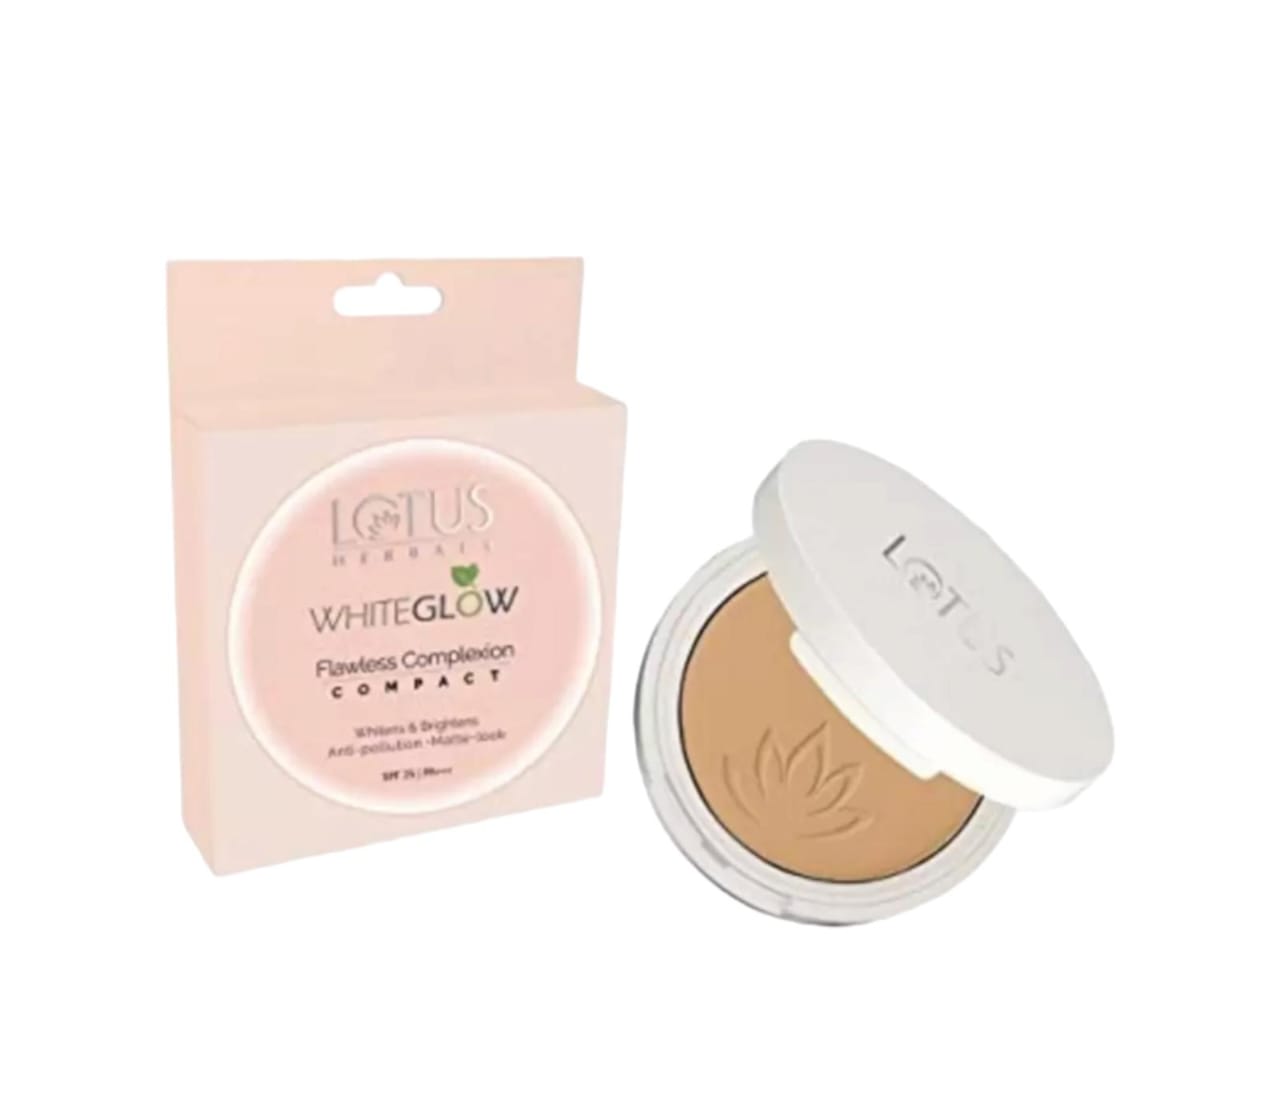 Lotus Herbals WhiteGlow Flawless Complexion Compact